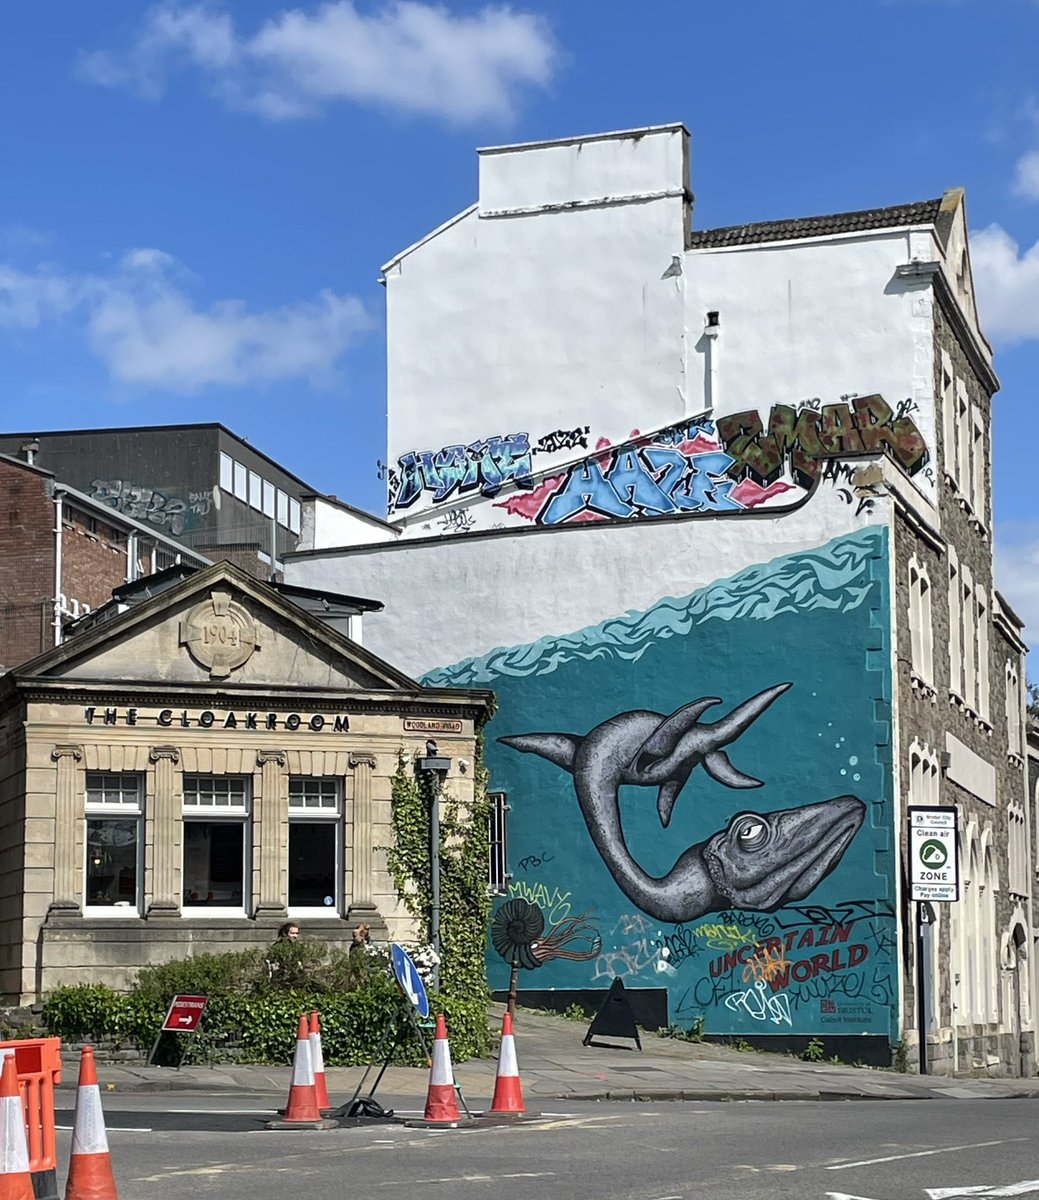 #Bristol it’s a crazy mash-up of a place. What’s not to like!